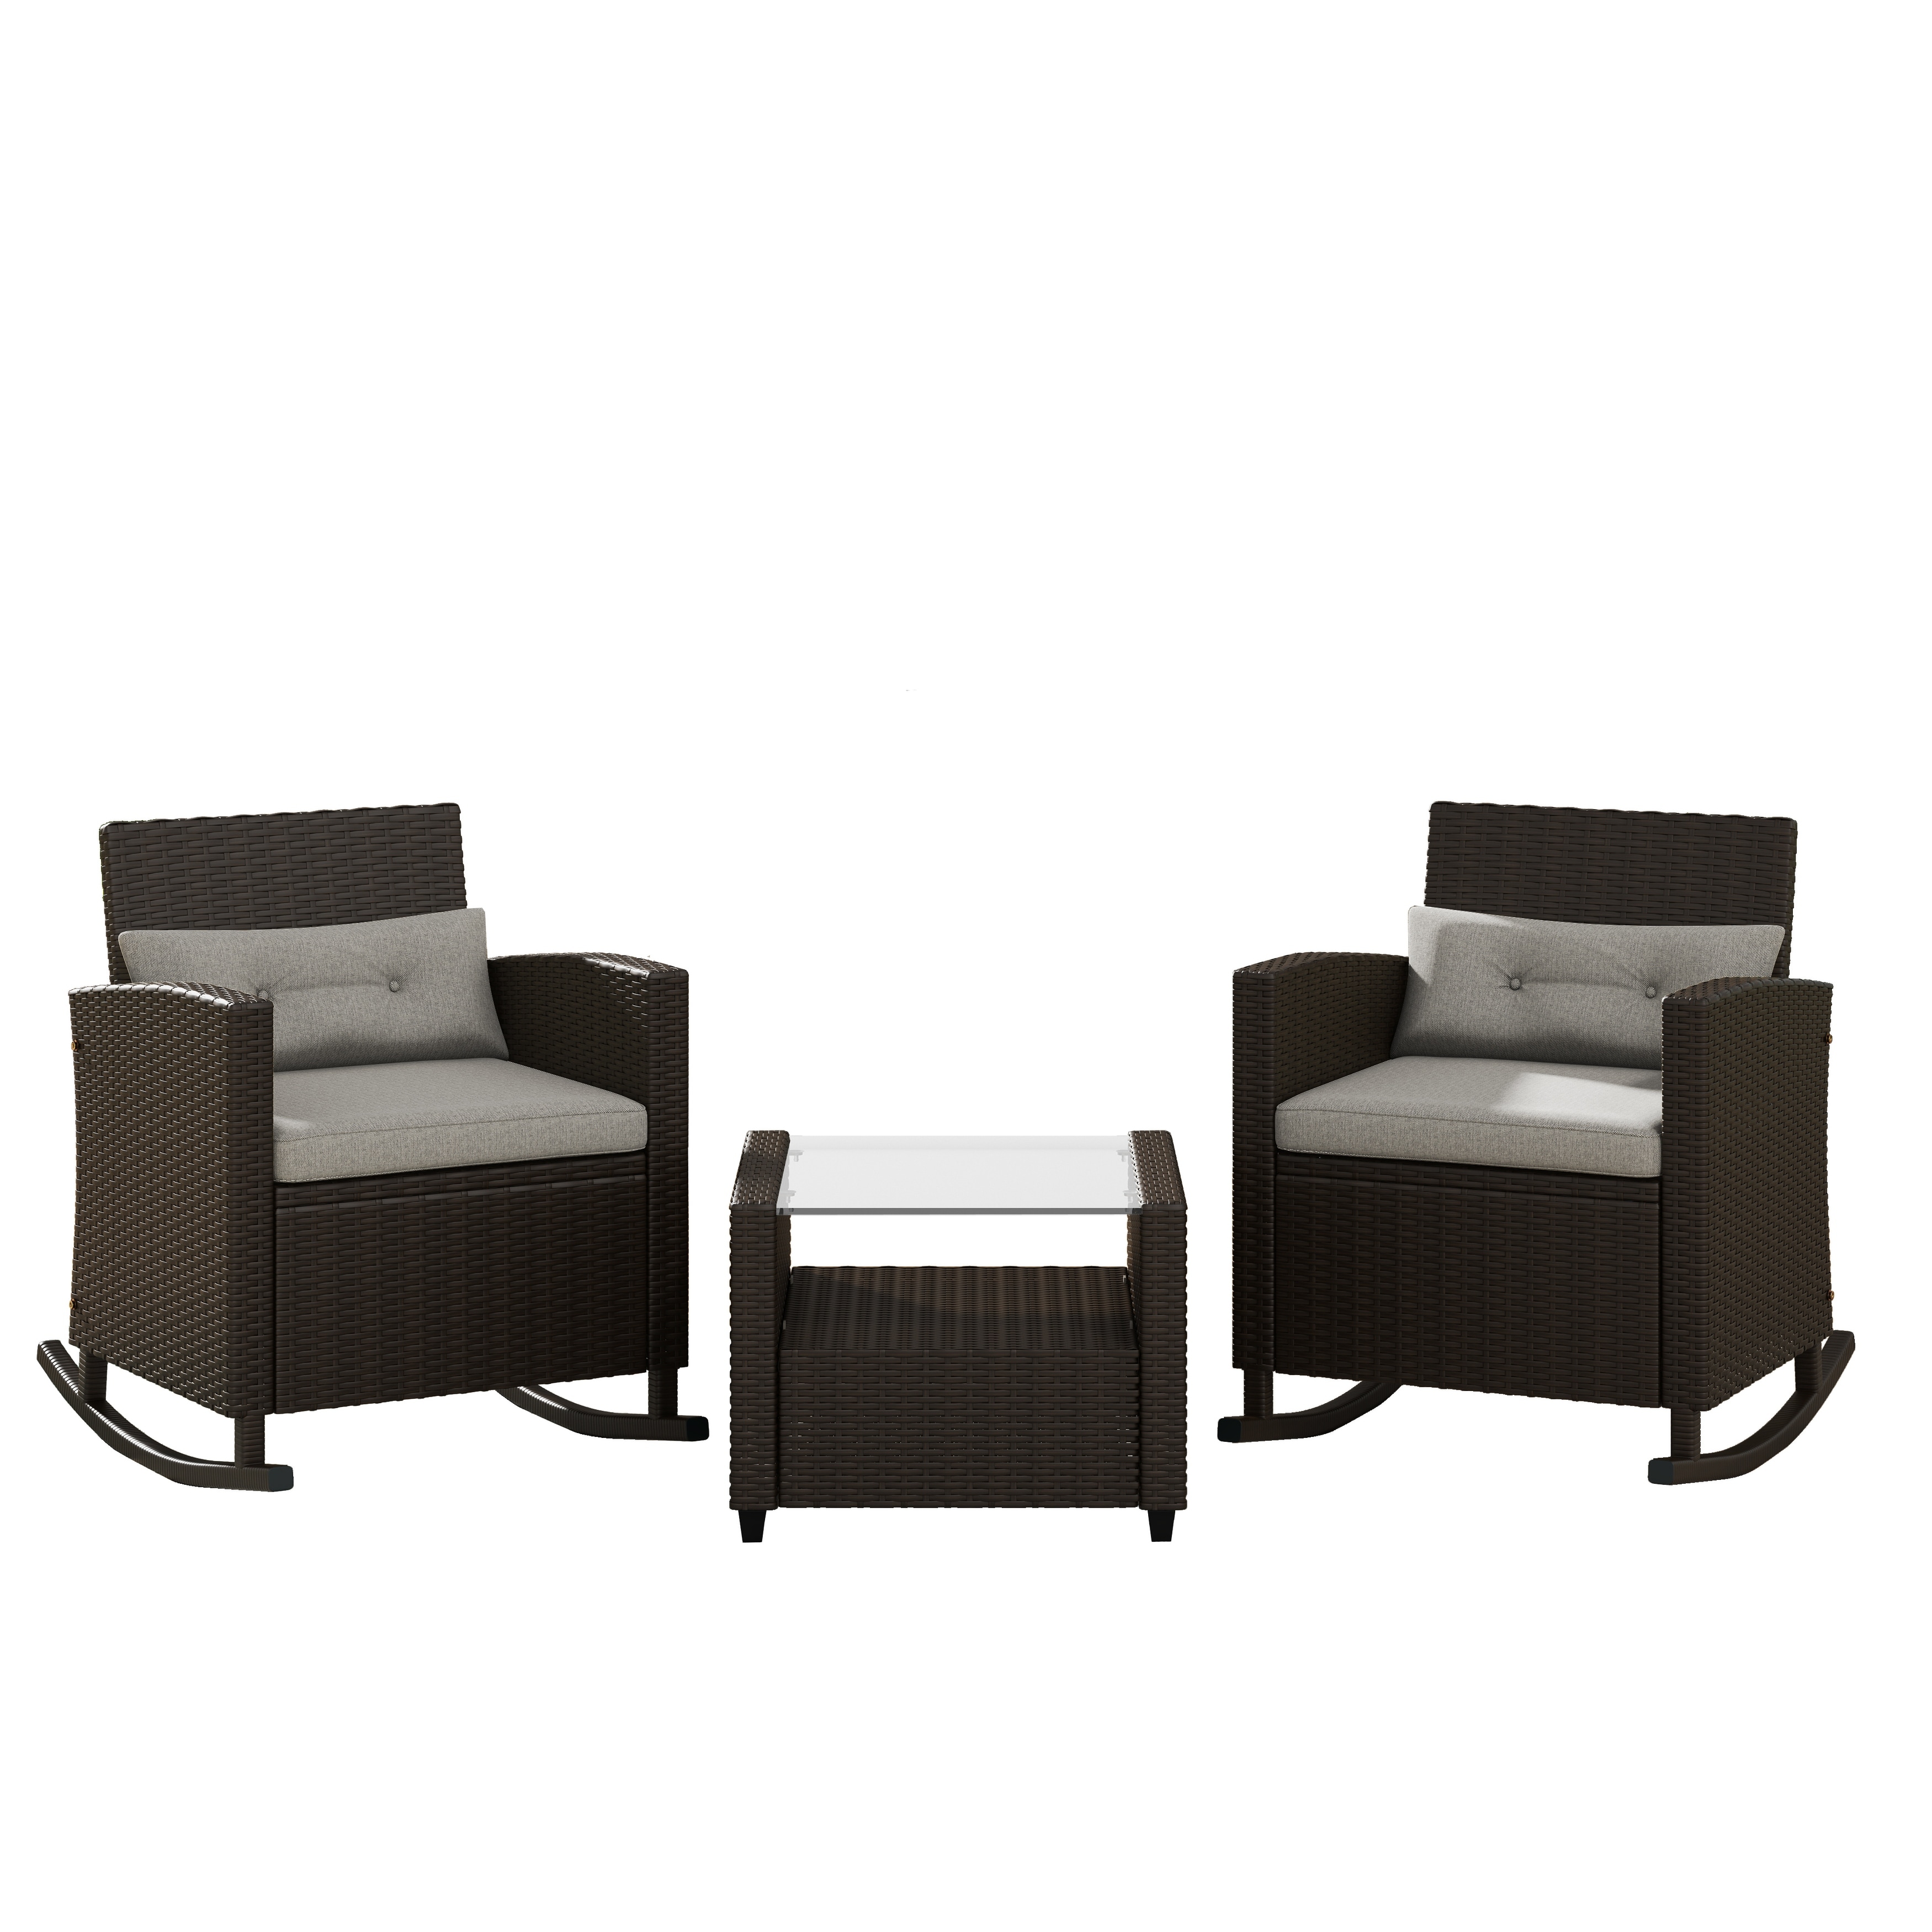 Corvus Fatih 3-piece Outdoor Wicker Rocking Chat Set With Cushions